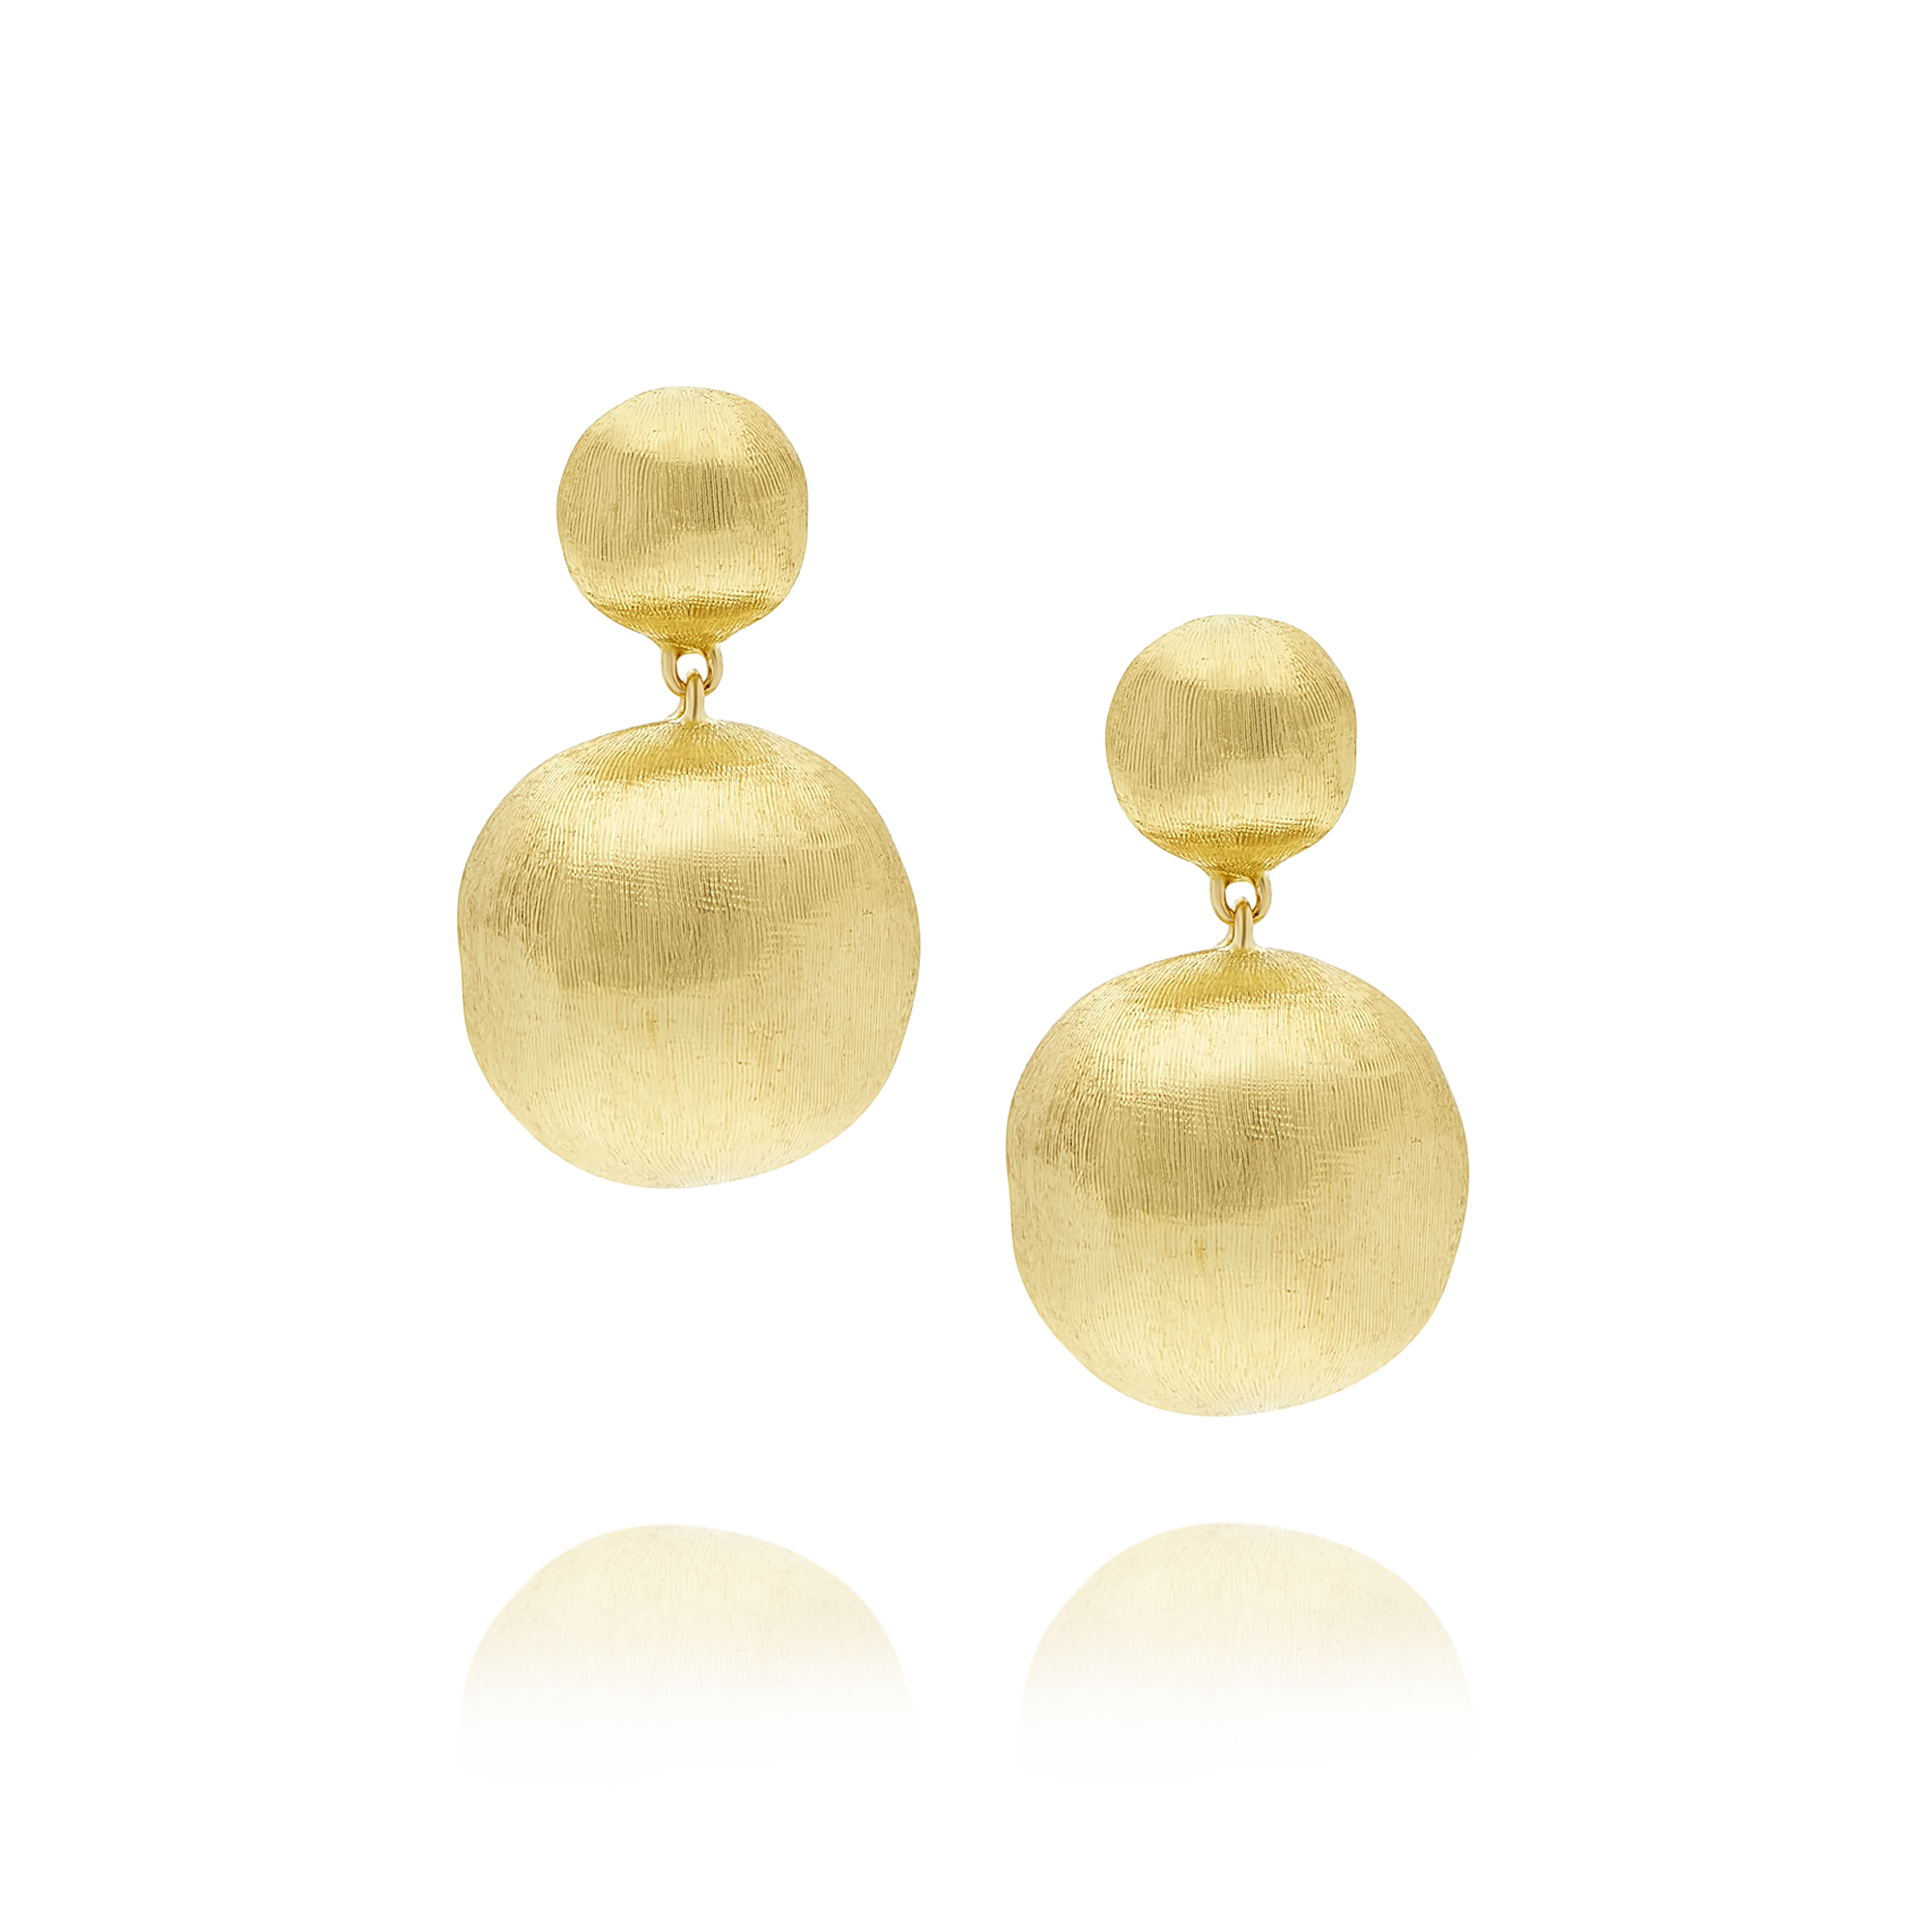 18ct Gold "Africa" Drop Earrings Marco Bicego